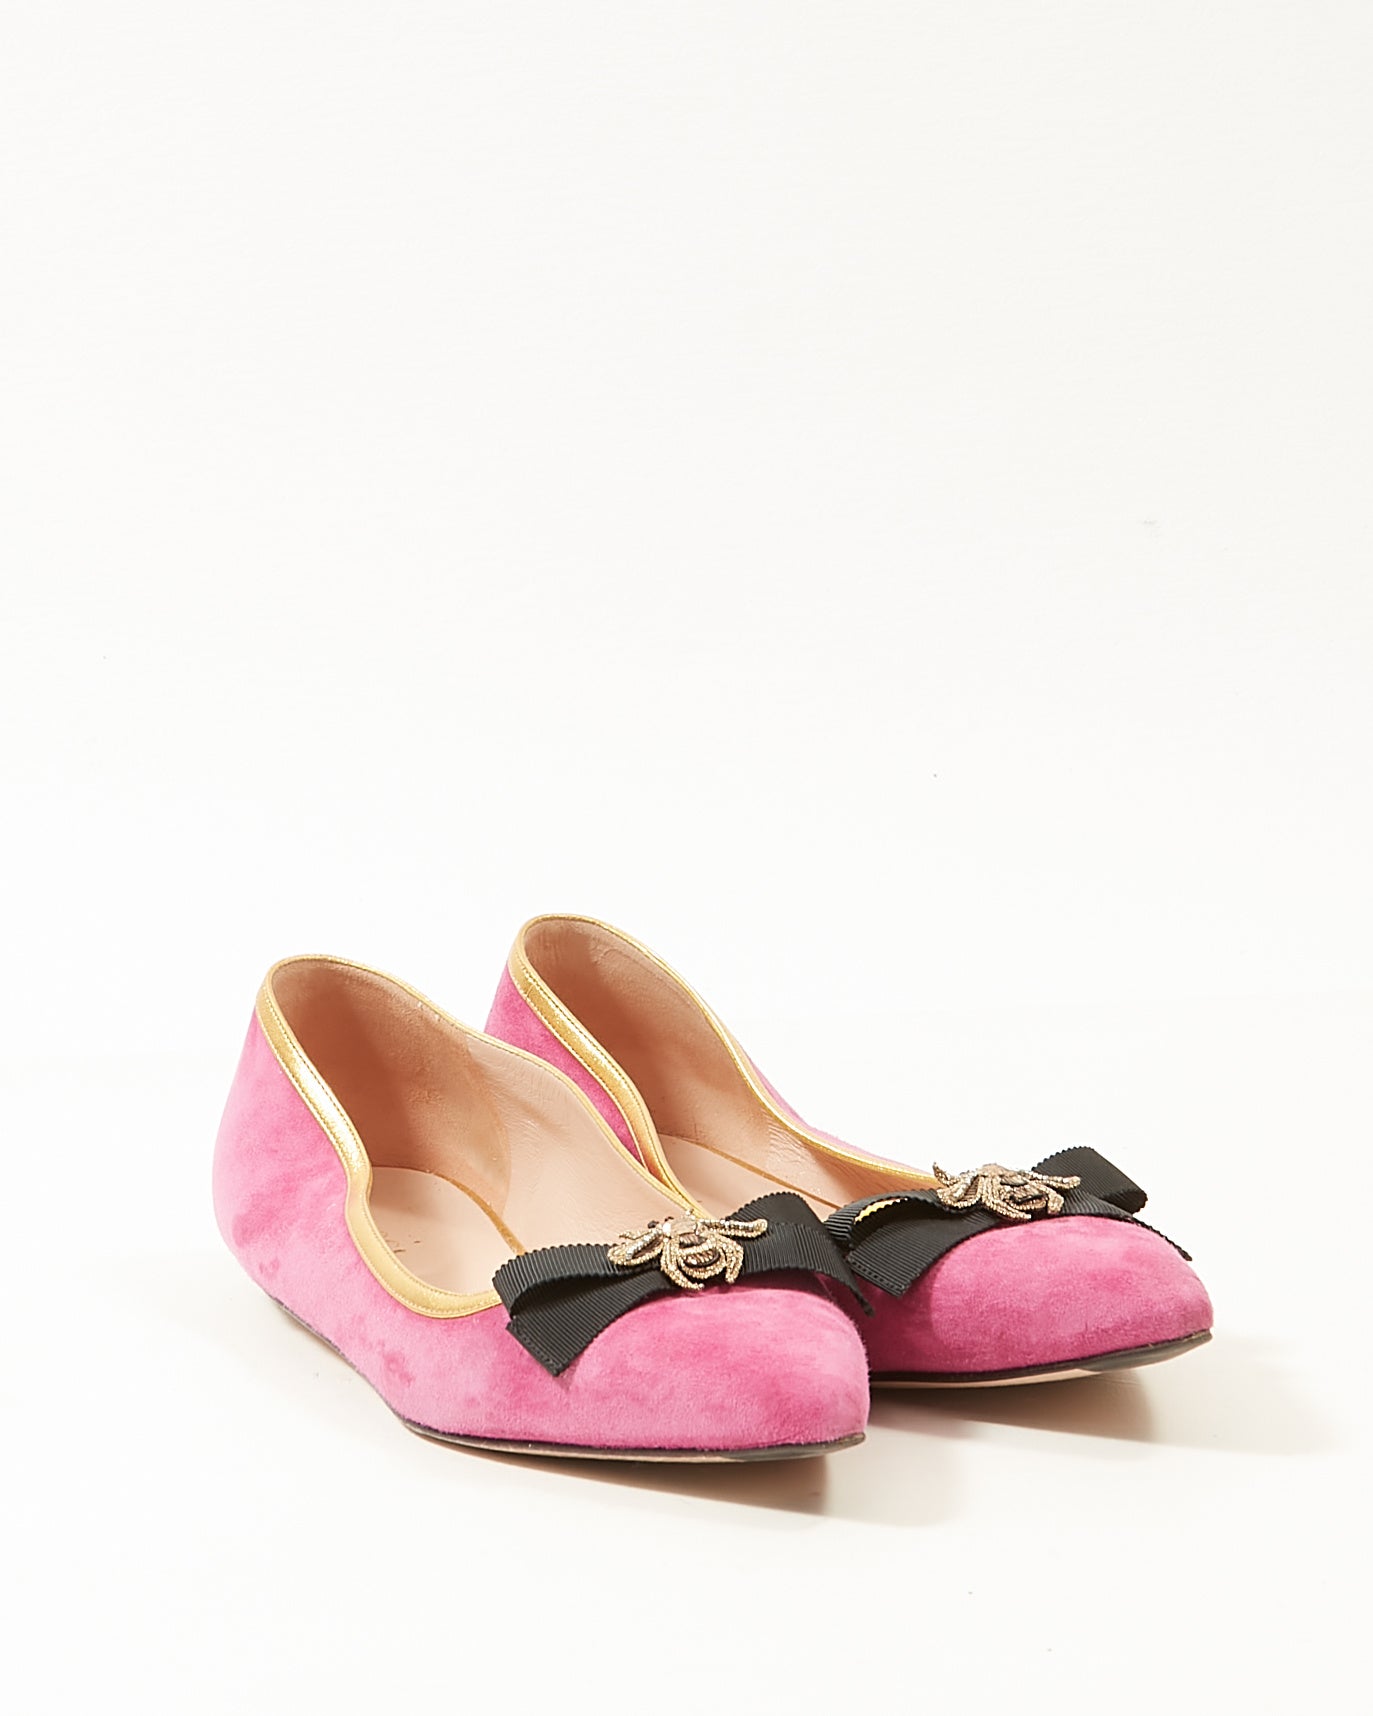 Gucci Pink Suede Embroidered Bee Gold Trim Flats - 39.5